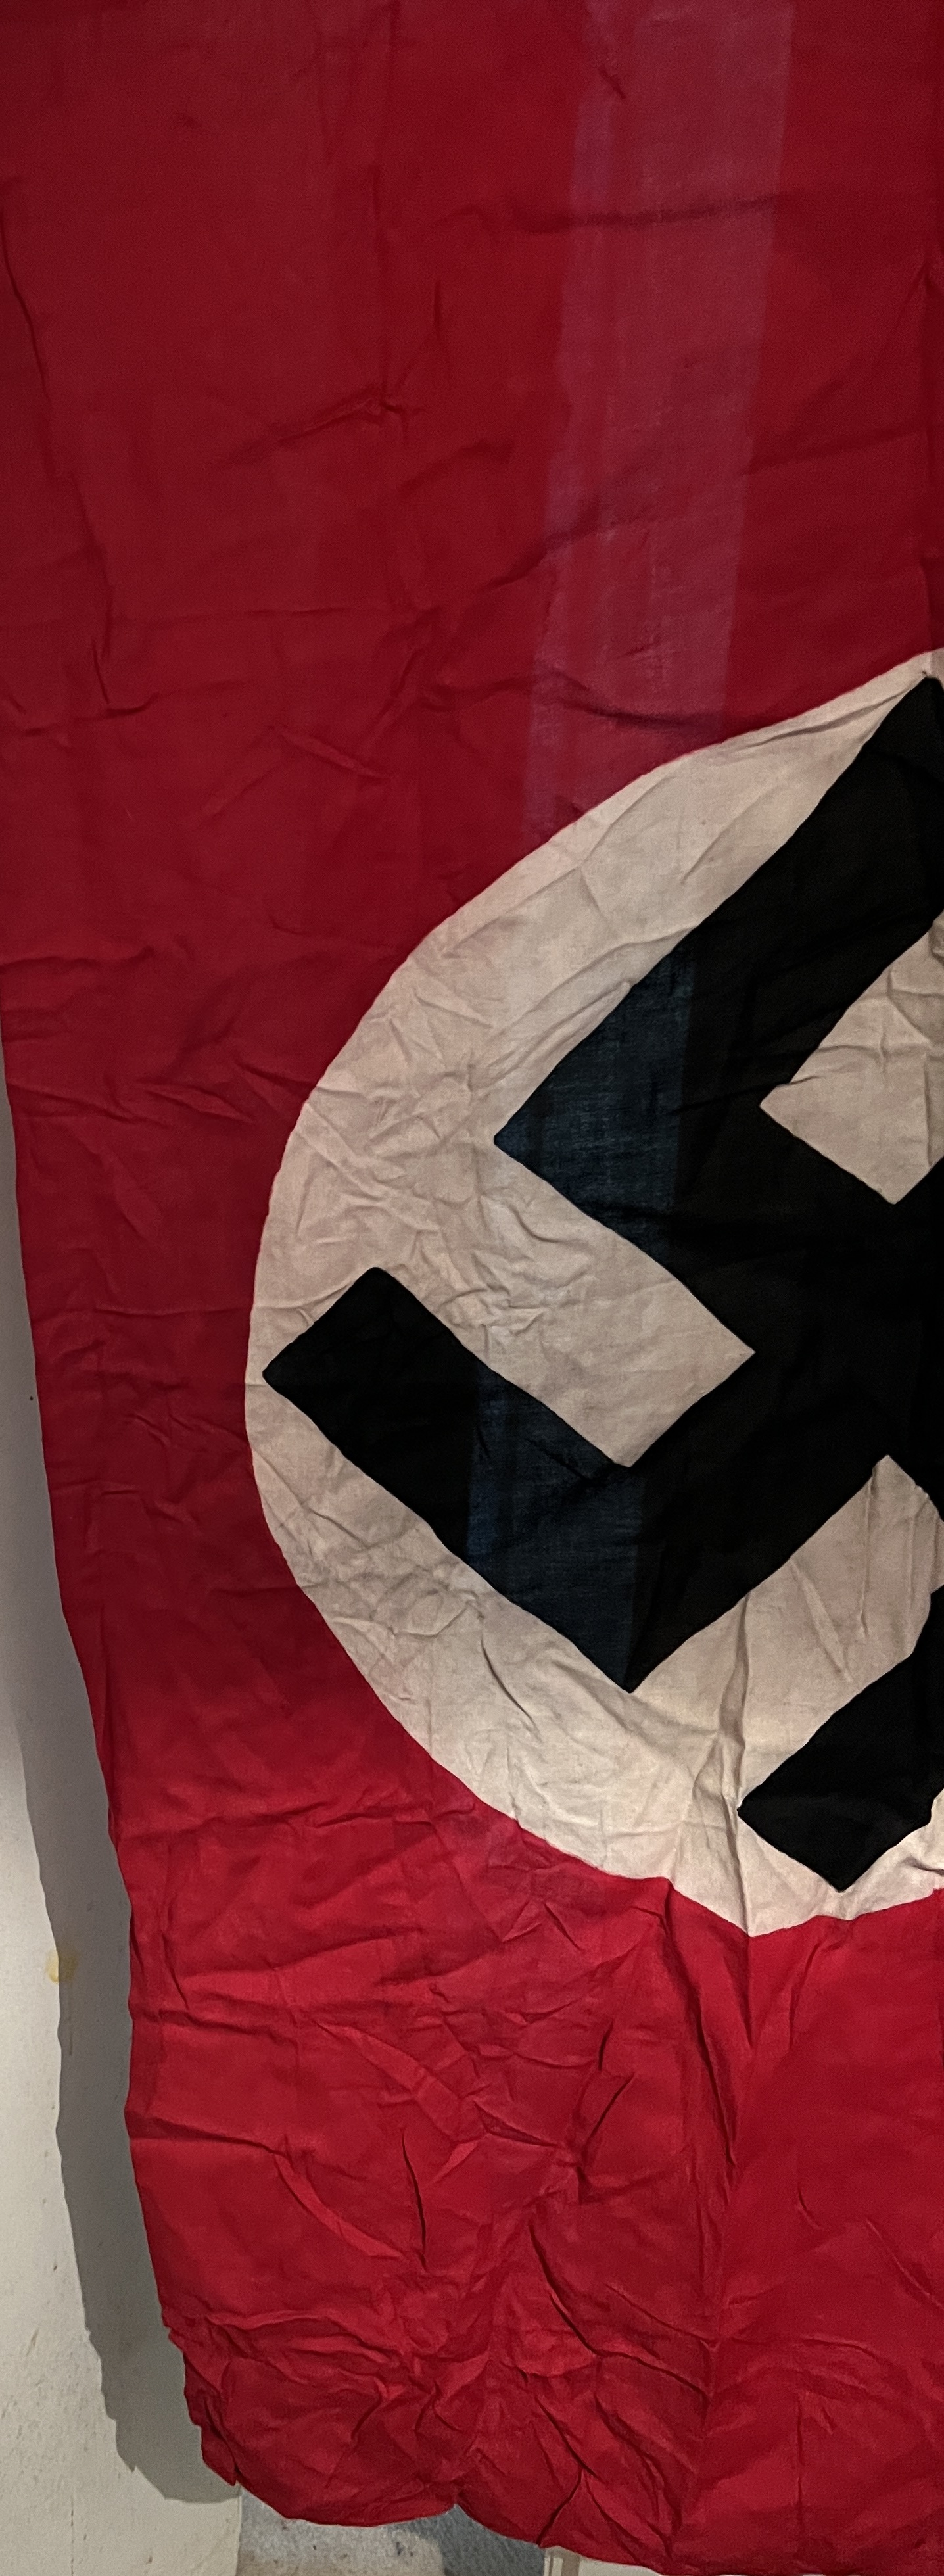 swastika flag, classic red white and black